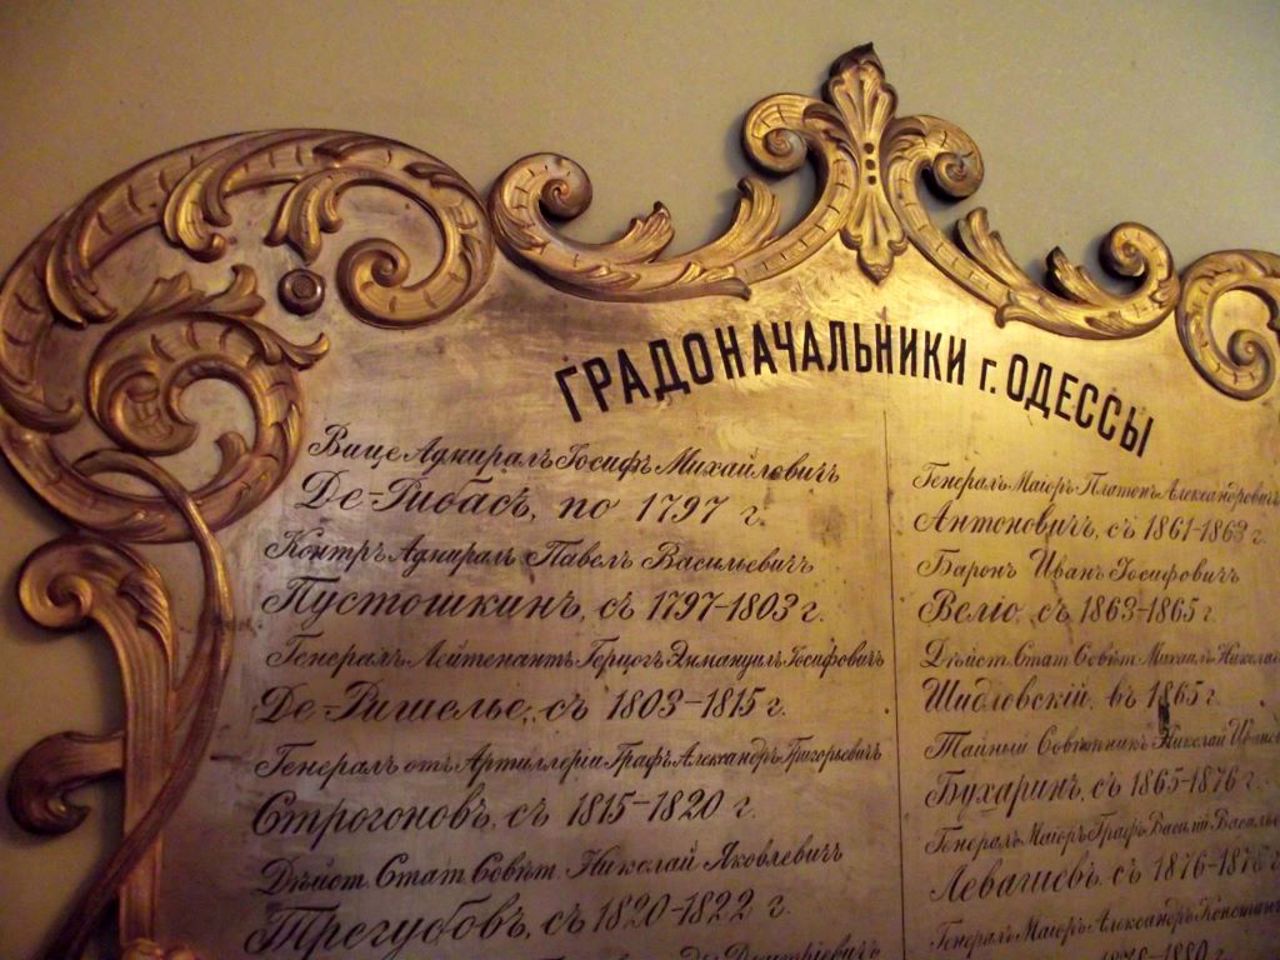 Historical and Local Lore Museum, Odesa